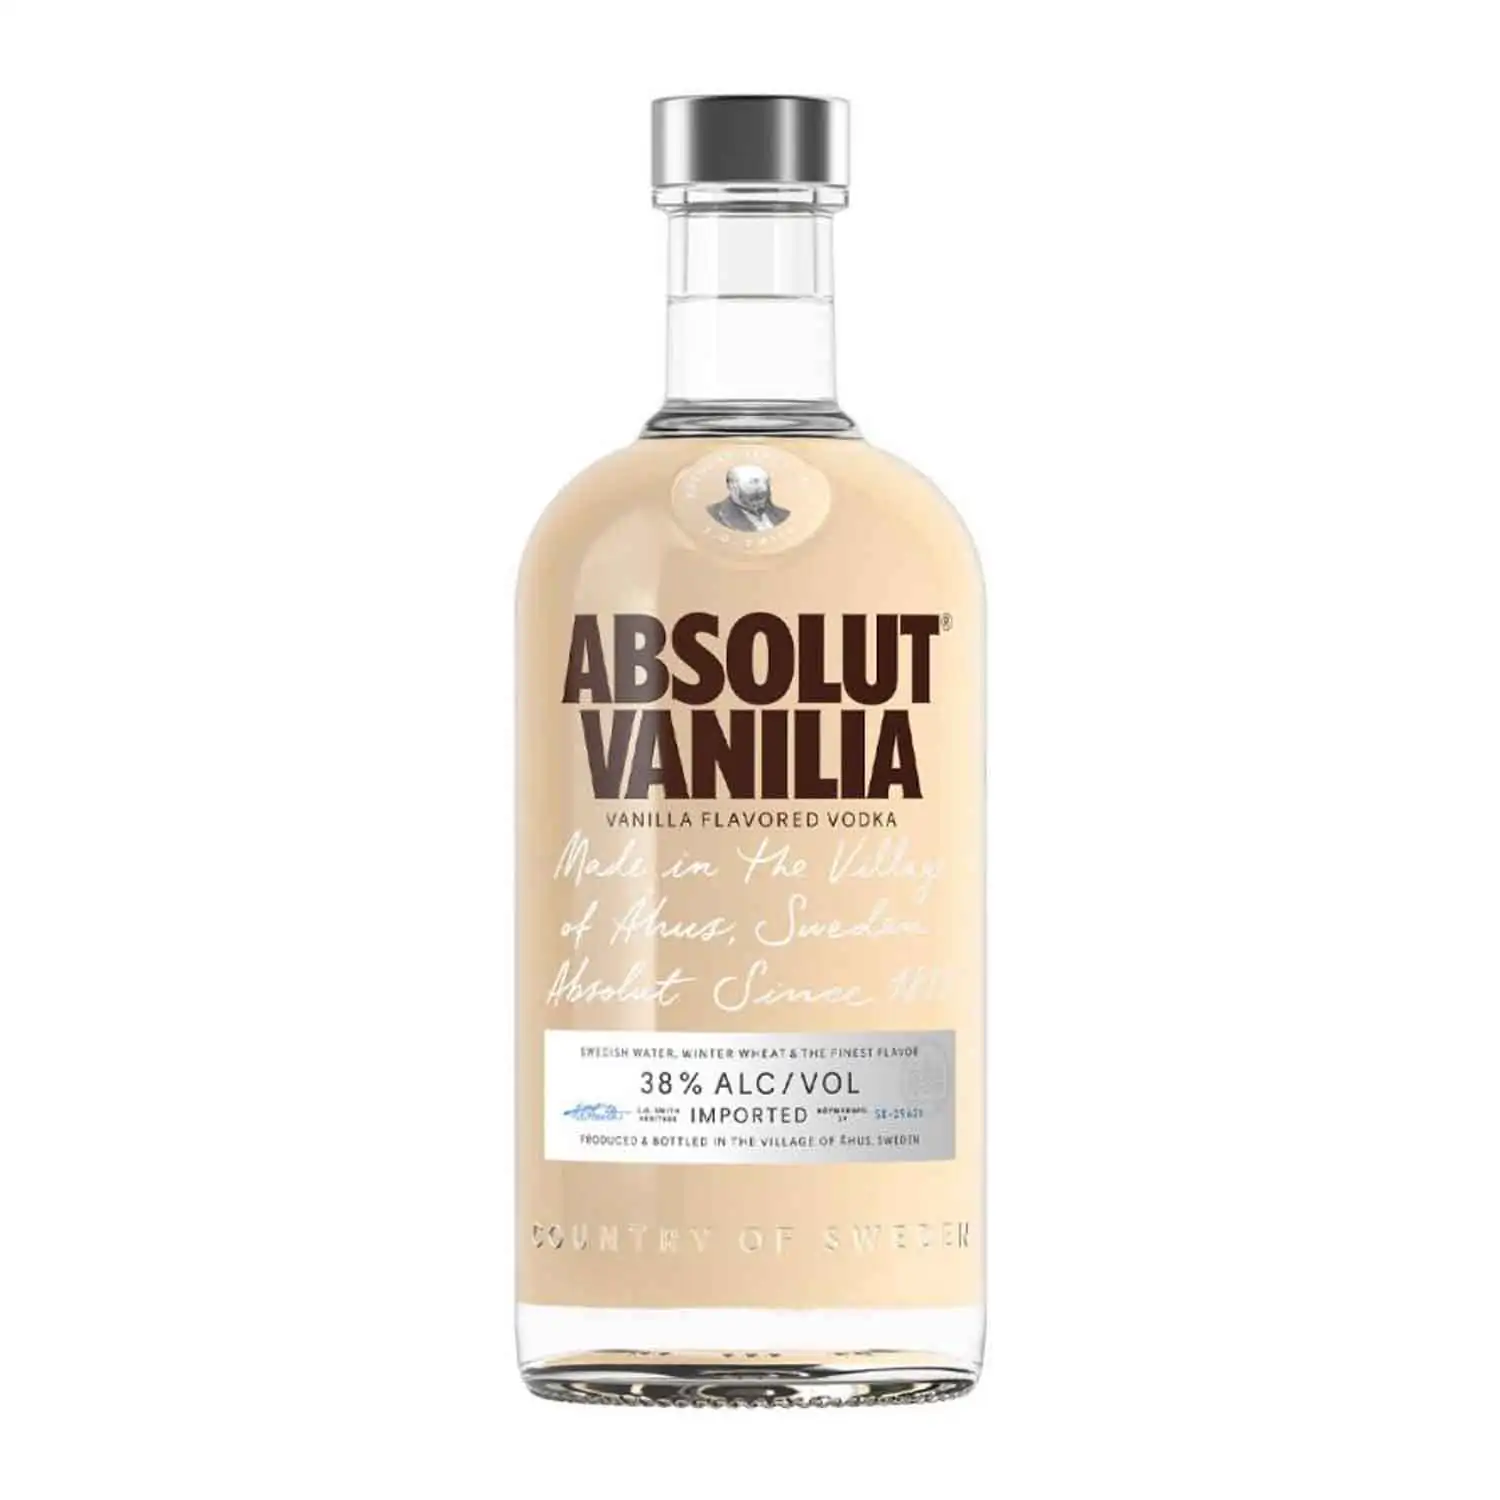 Absolut vanilia 70cl Alc 38% - Buy at Real Tobacco